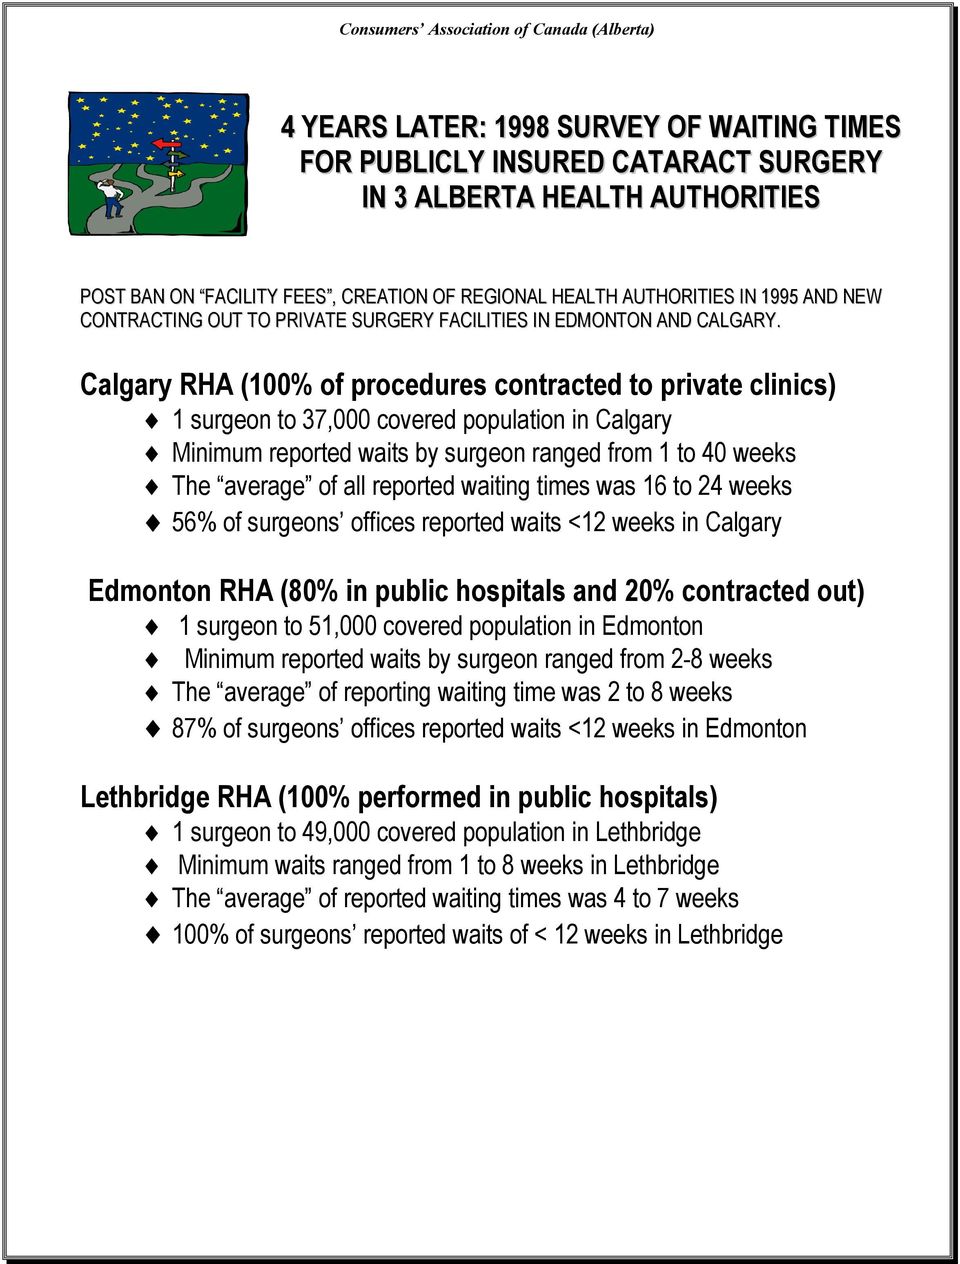 Calgary RHA (100% of procedures contracted to private clinics) 1 surgeon to 37,000 covered population in Calgary Minimum reported waits by surgeon ranged from 1 to 40 weeks The average of all